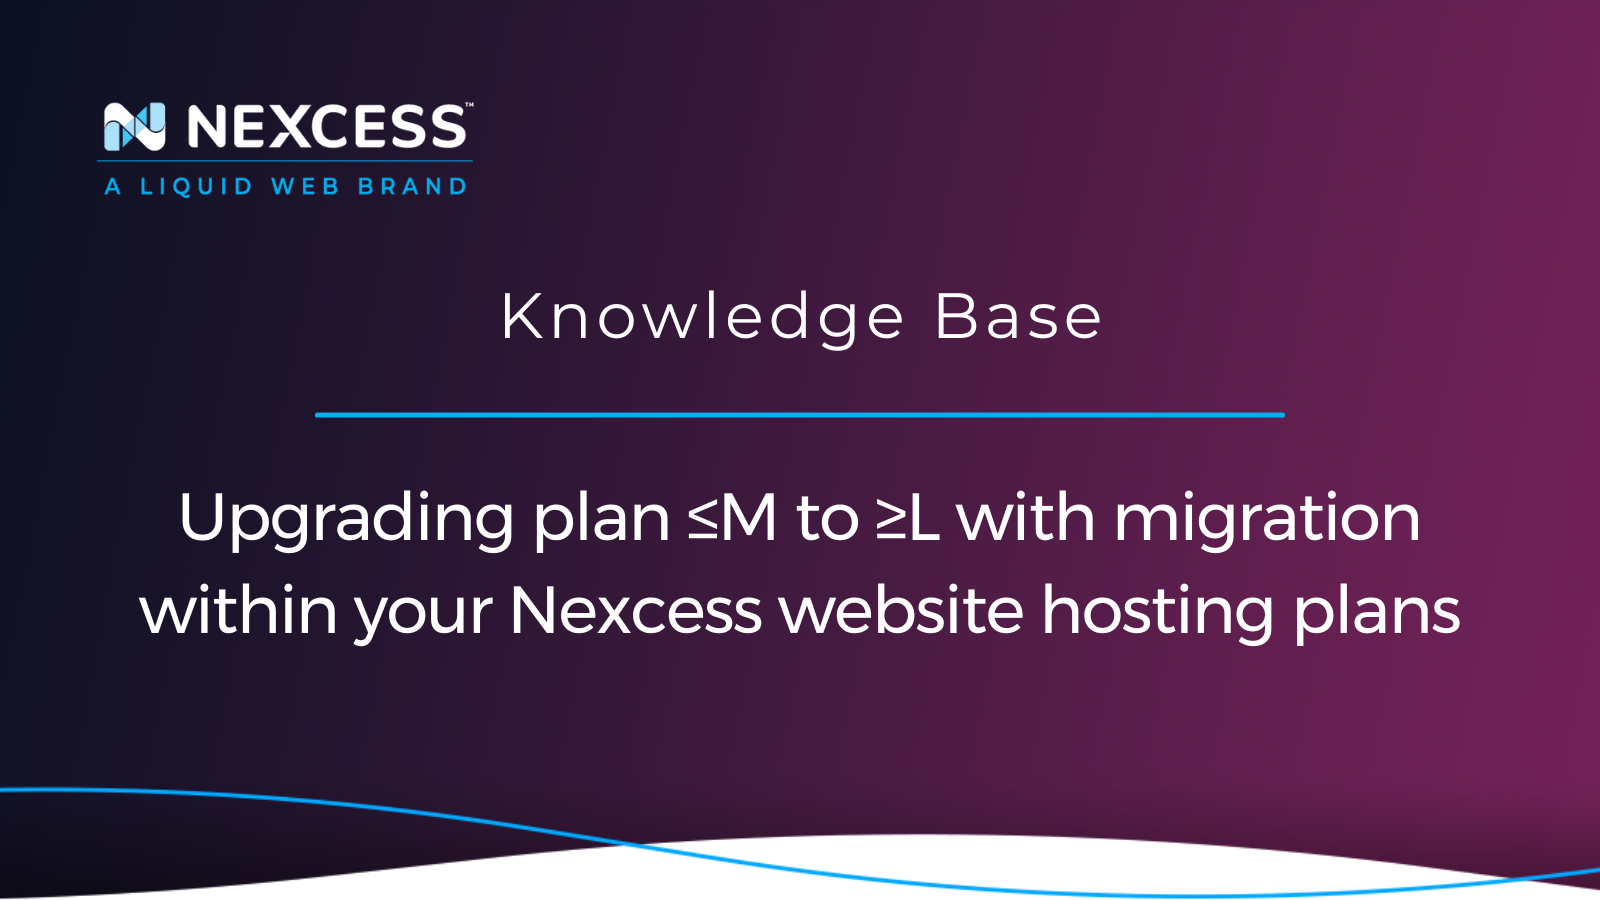 Upgrading plan ≤M to ≥L with migration within your Nexcess website hosting plans